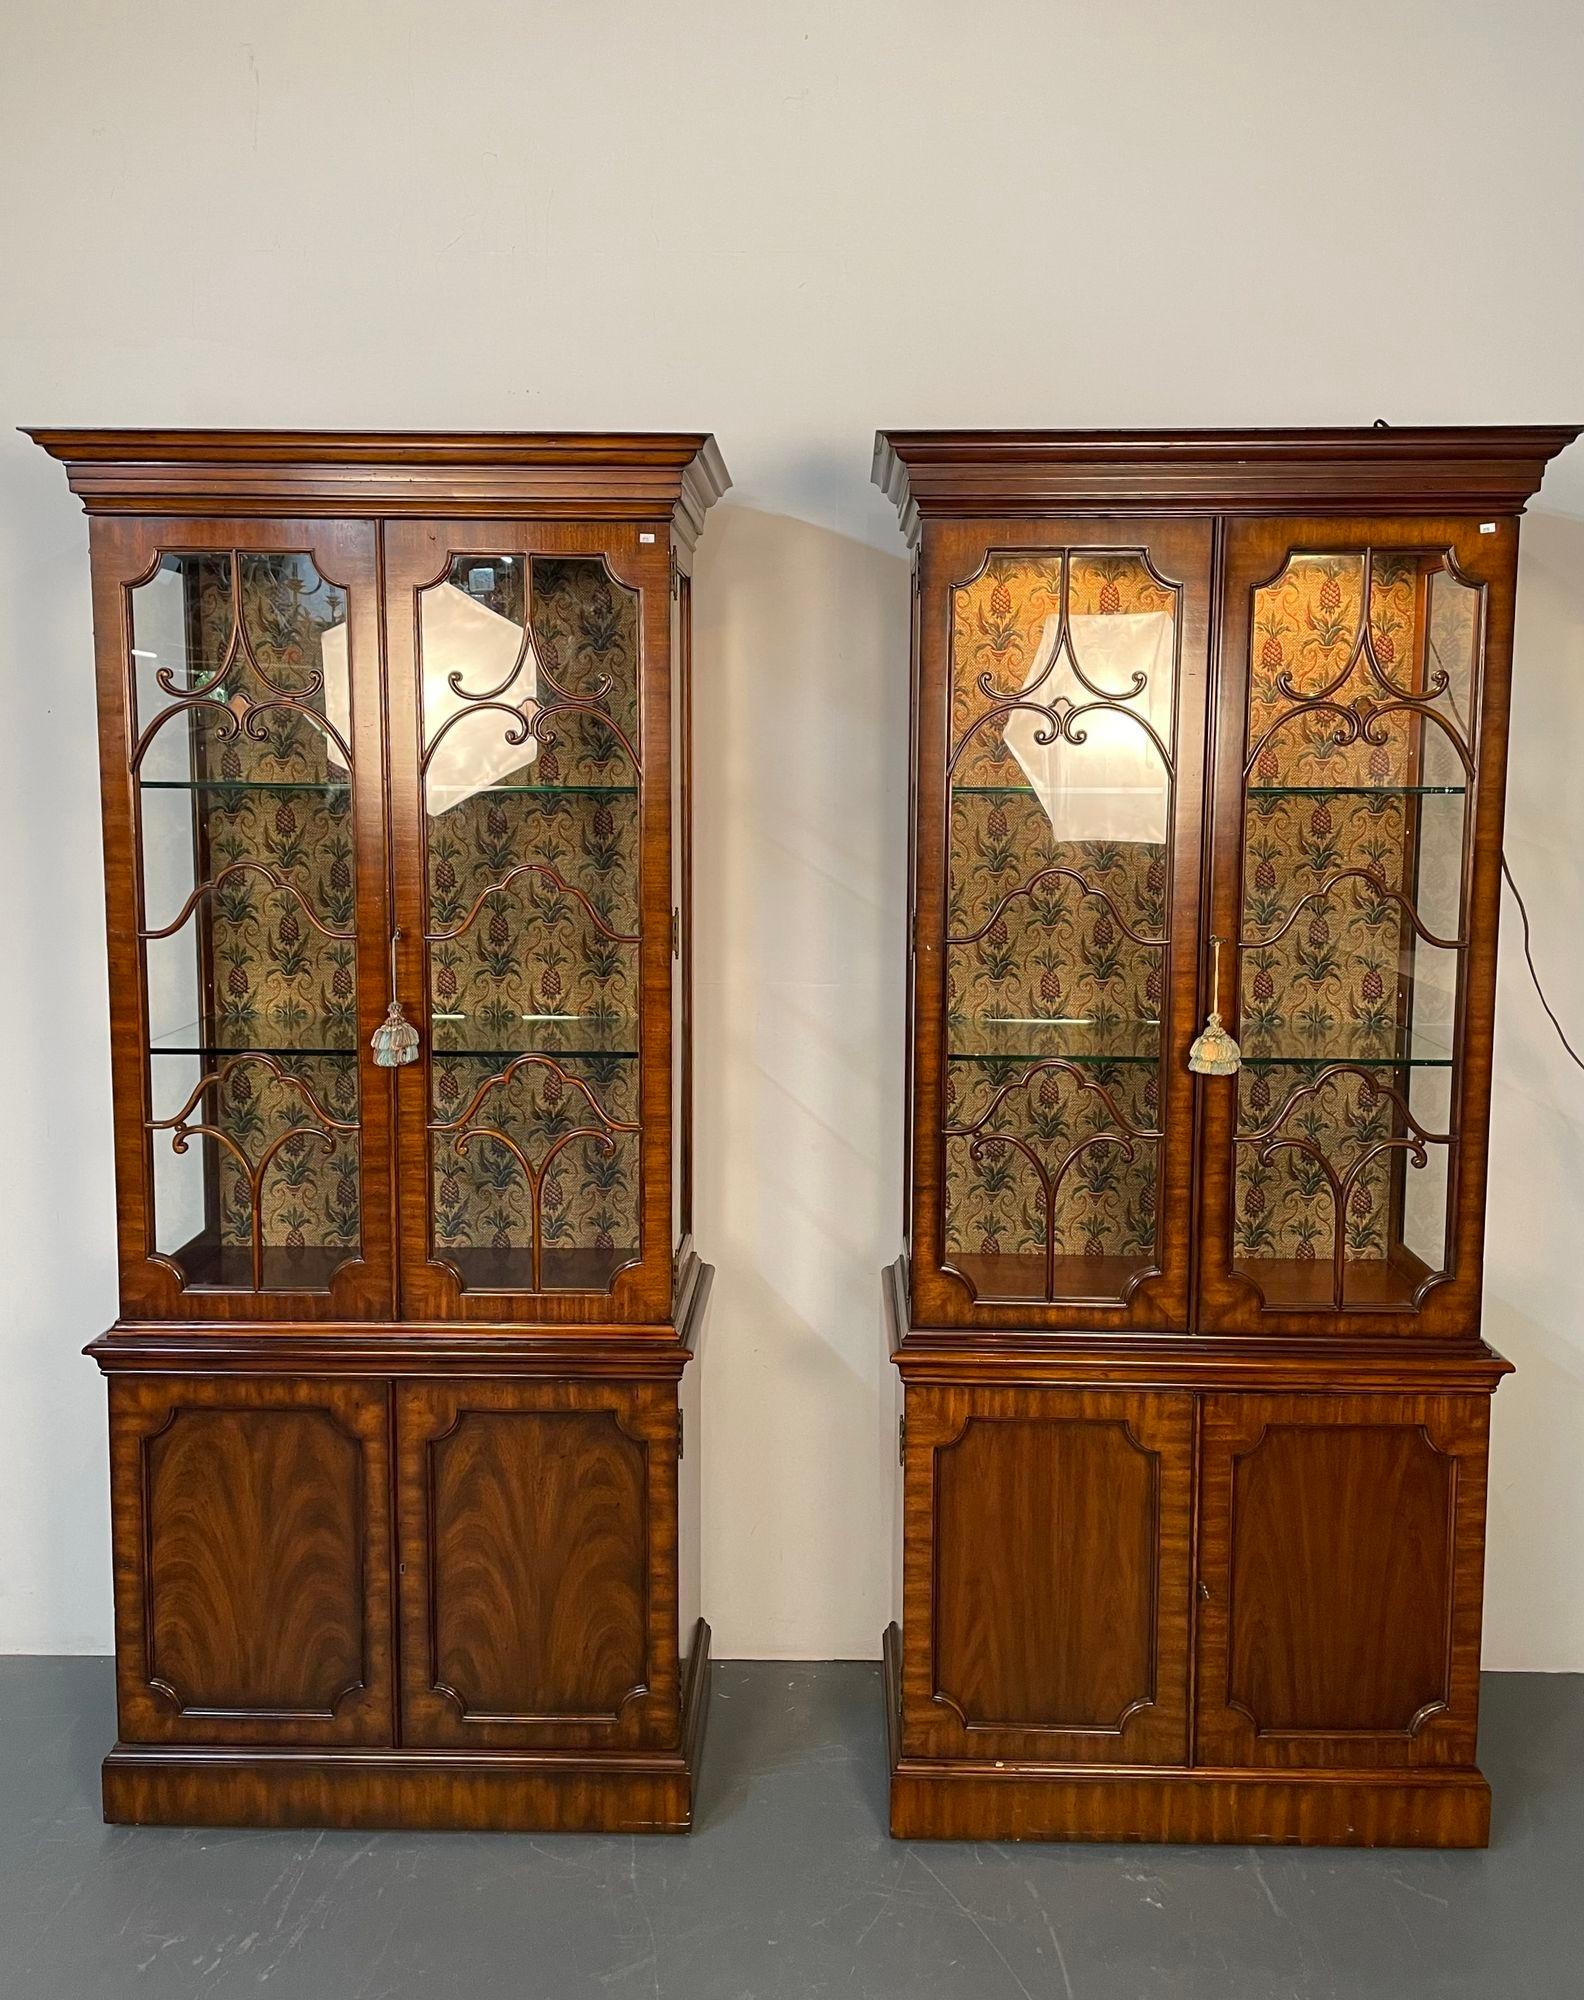 Chinese Chippendale Style Bookcase, Showcase Cabinets, Mahogany, Maitland Smith


Stunning Pair of Chinese Chippendale Style Bookcase – Showcase Cabinets. Each in a nice flame mahogany having two thick shelves with a tapestry pineapple, decorated